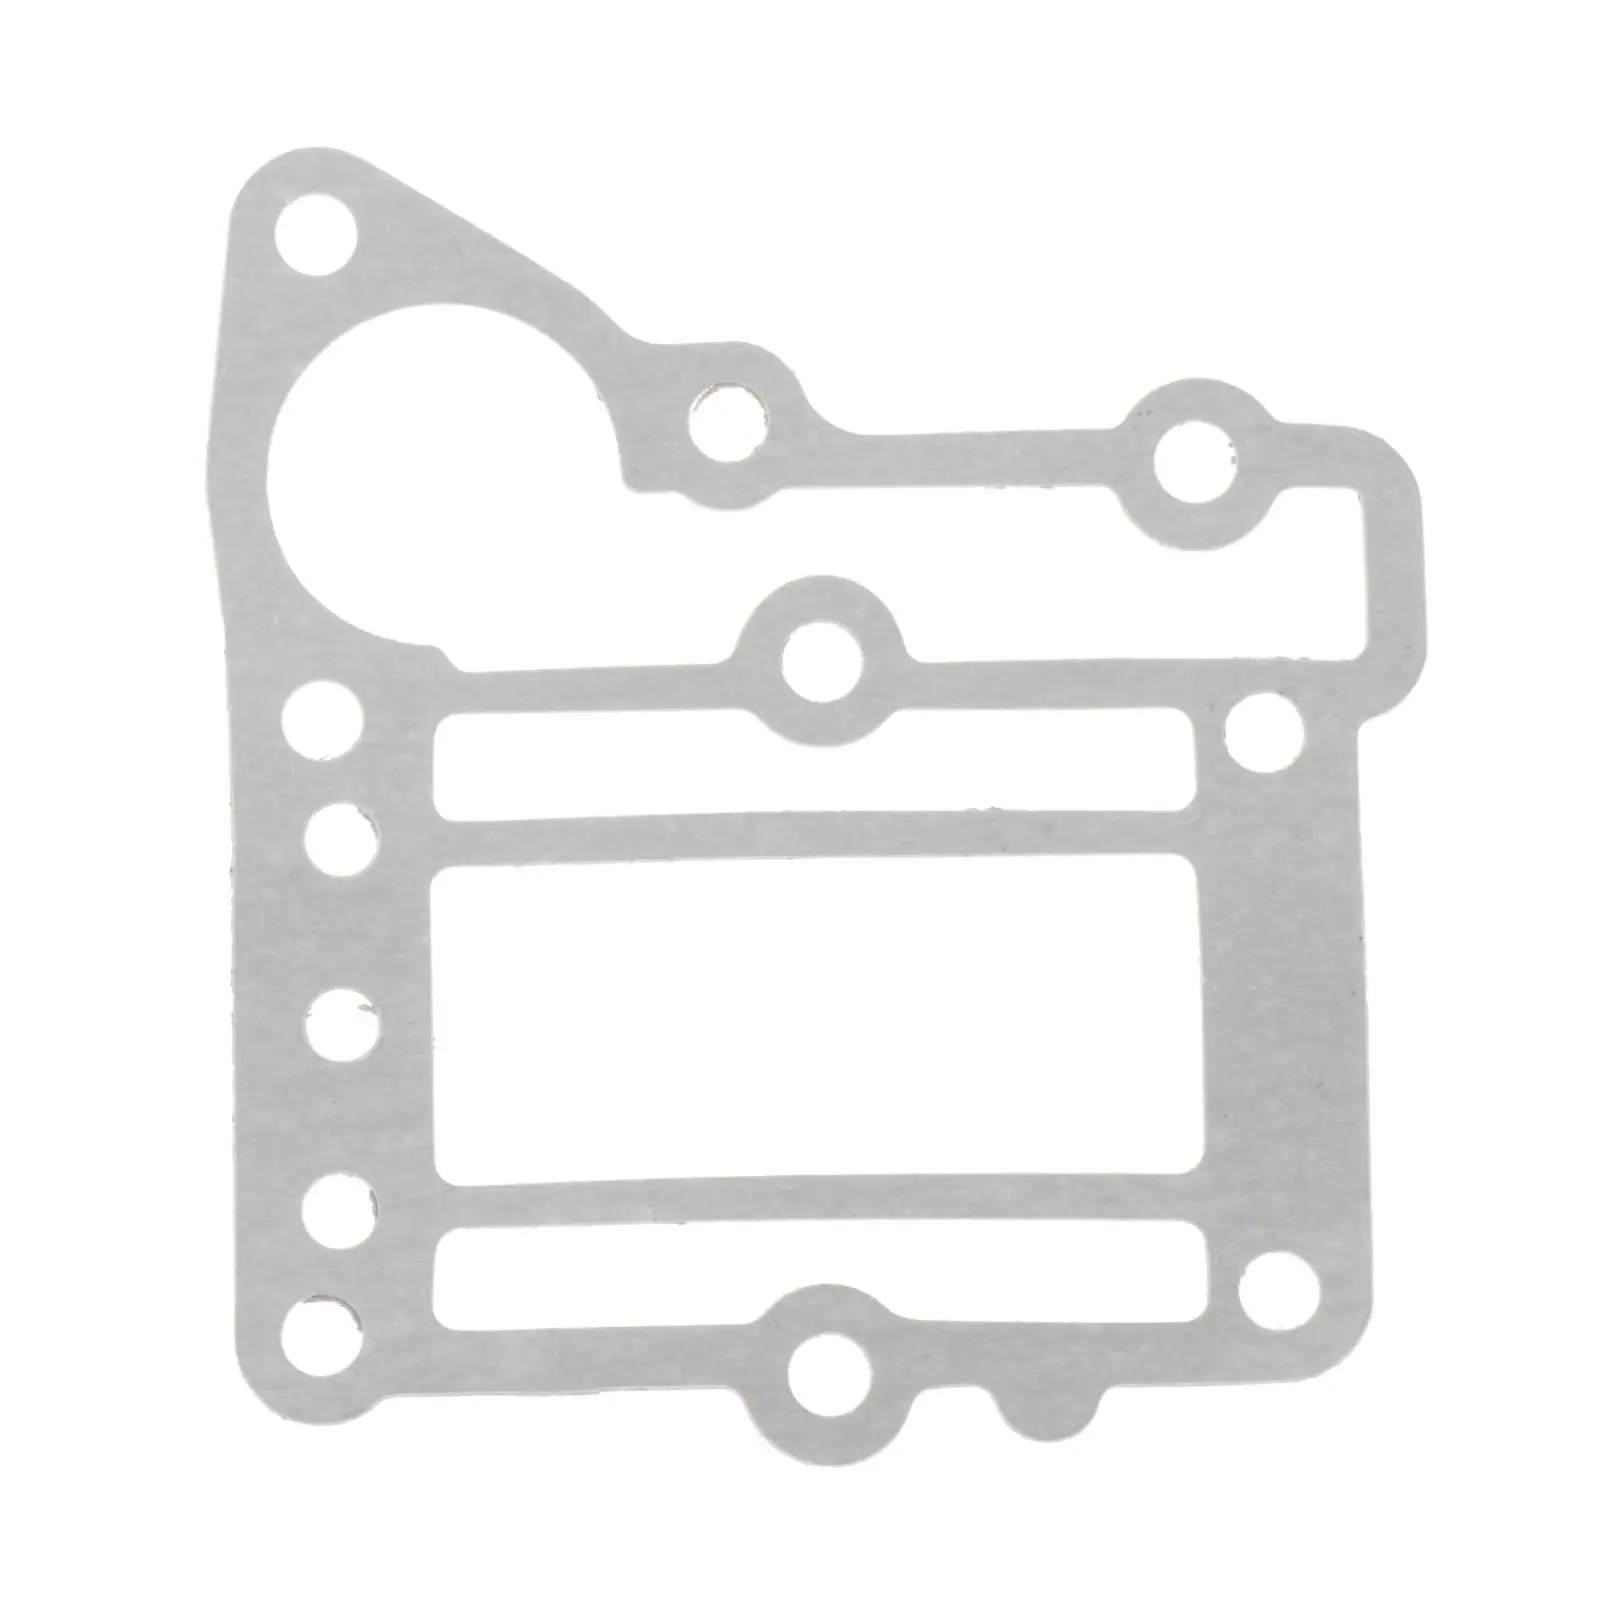 Motorcycle Gasket Outer Cover, Outer Exhaust Gasket, 6E3-41114-A1 Thermostat for Yamaha 5HP Outboard Motor 4B 5C 85